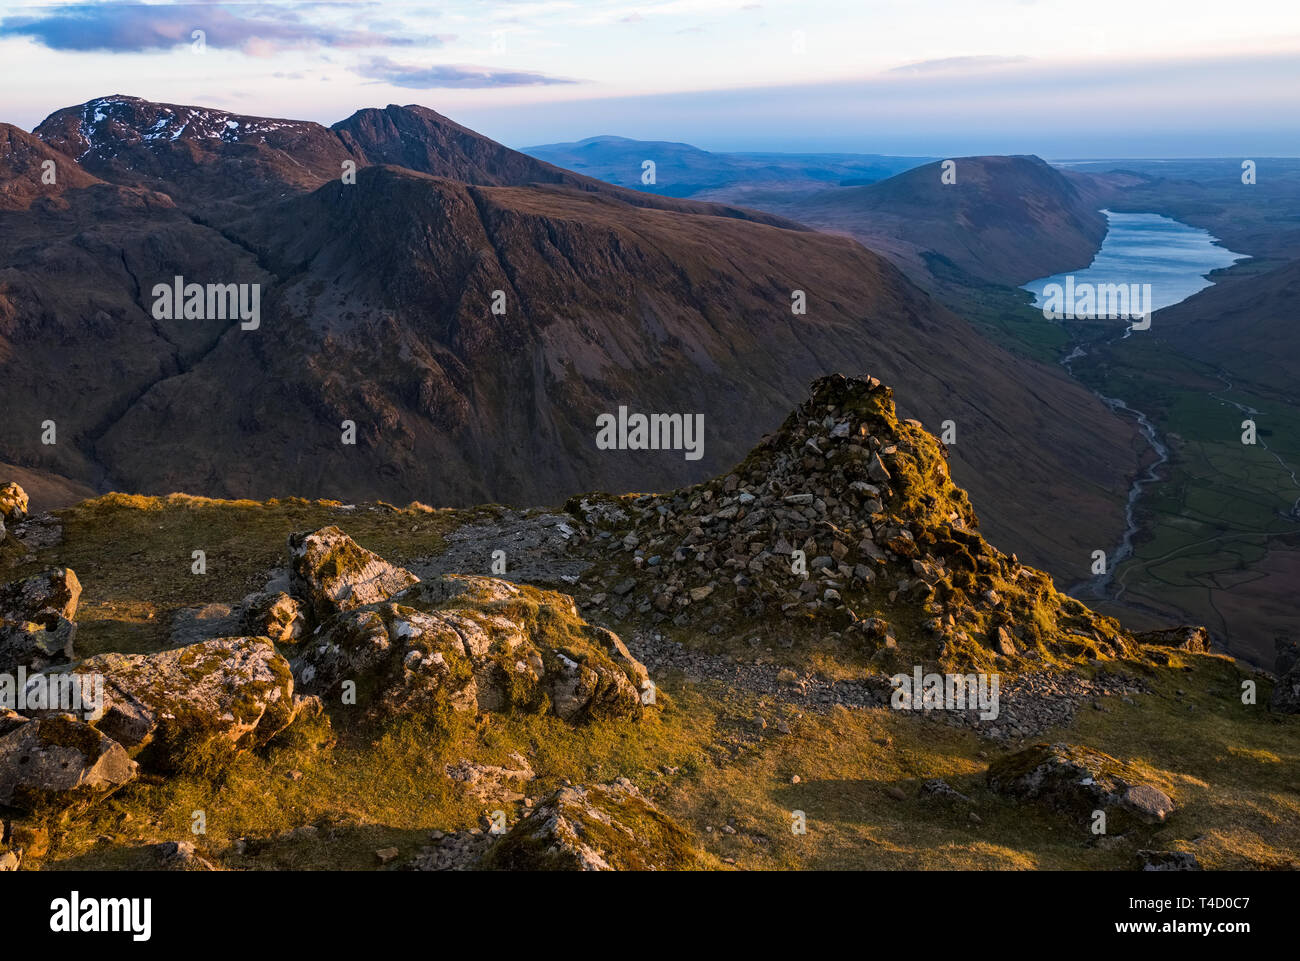 Scafell Pike, Sca Fell, Lingmell, Illgill Head & Wast Water from the Westmorland Cairn near the summit of Great Gable in the English Lake District. Stock Photo